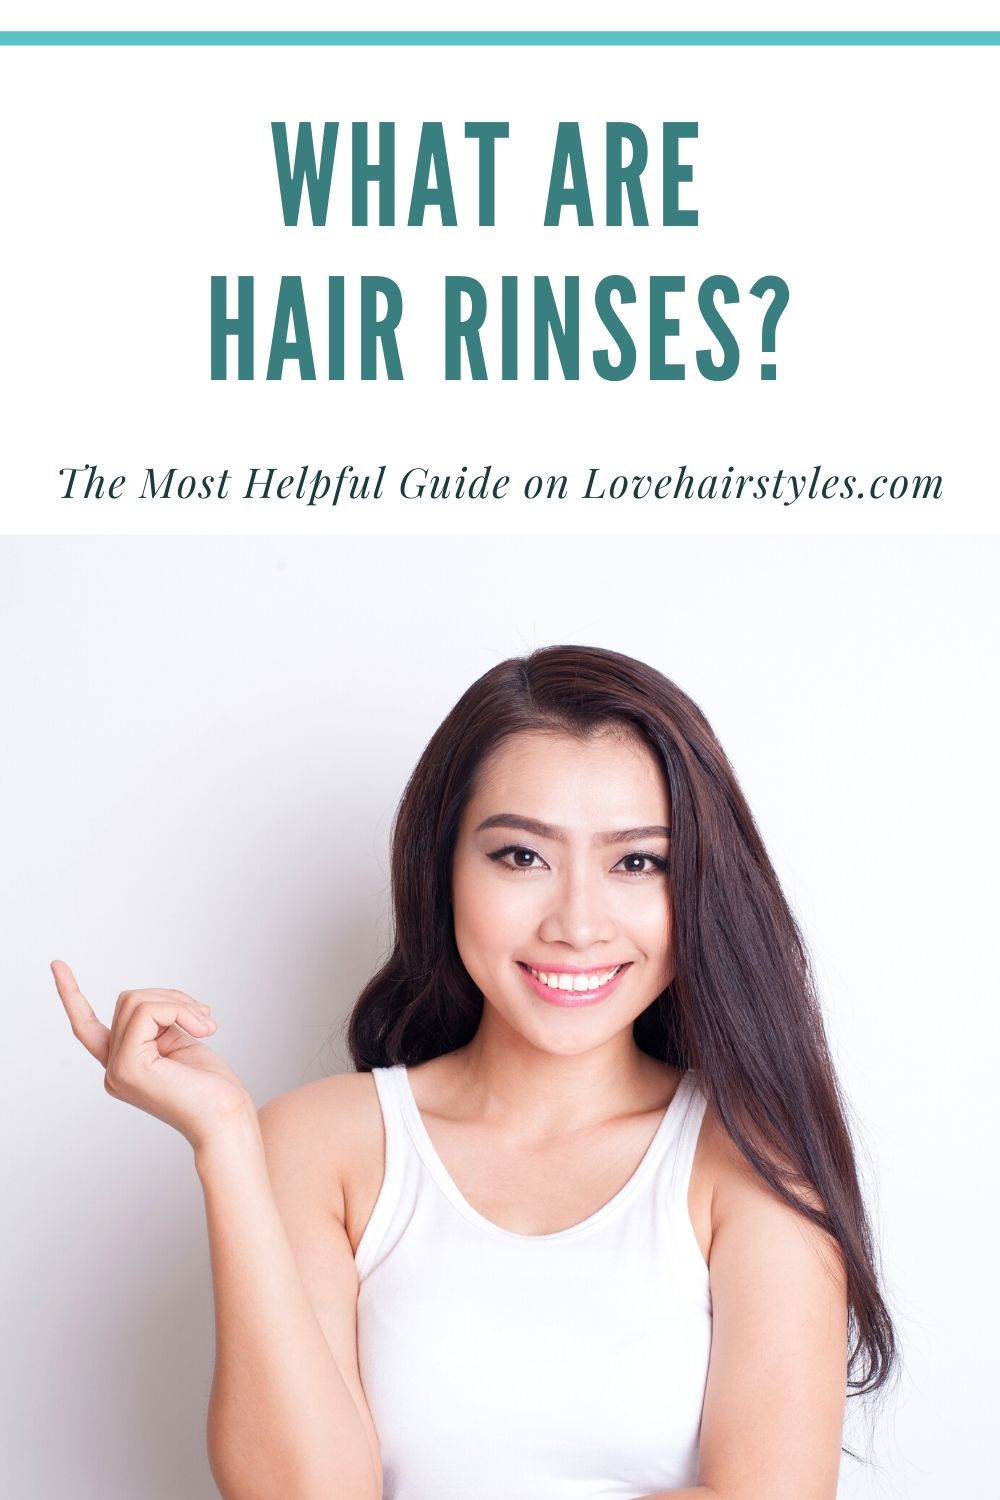 What Are Hair Rinses?